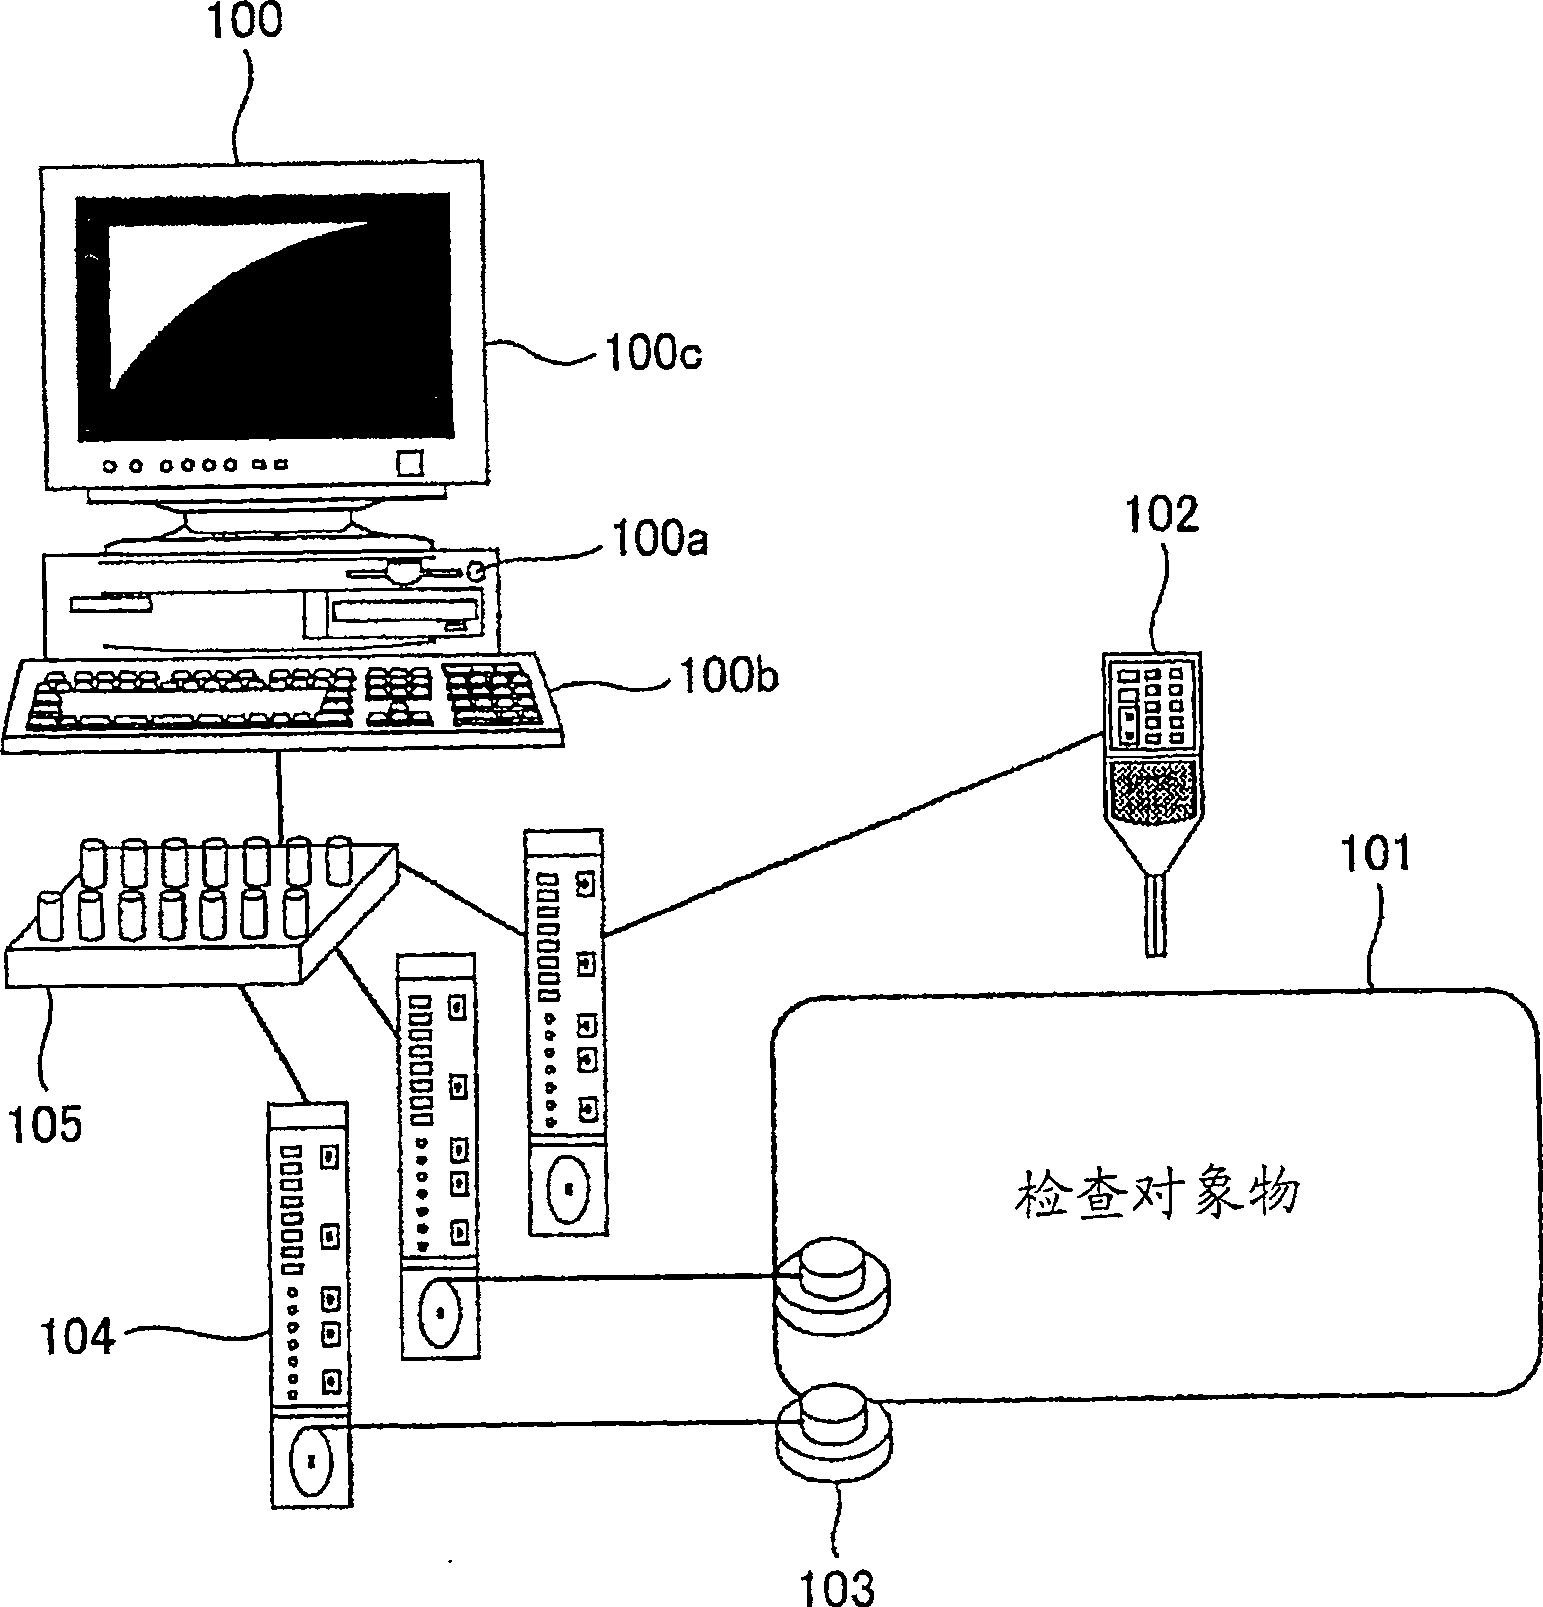 Inspection apparatus and method